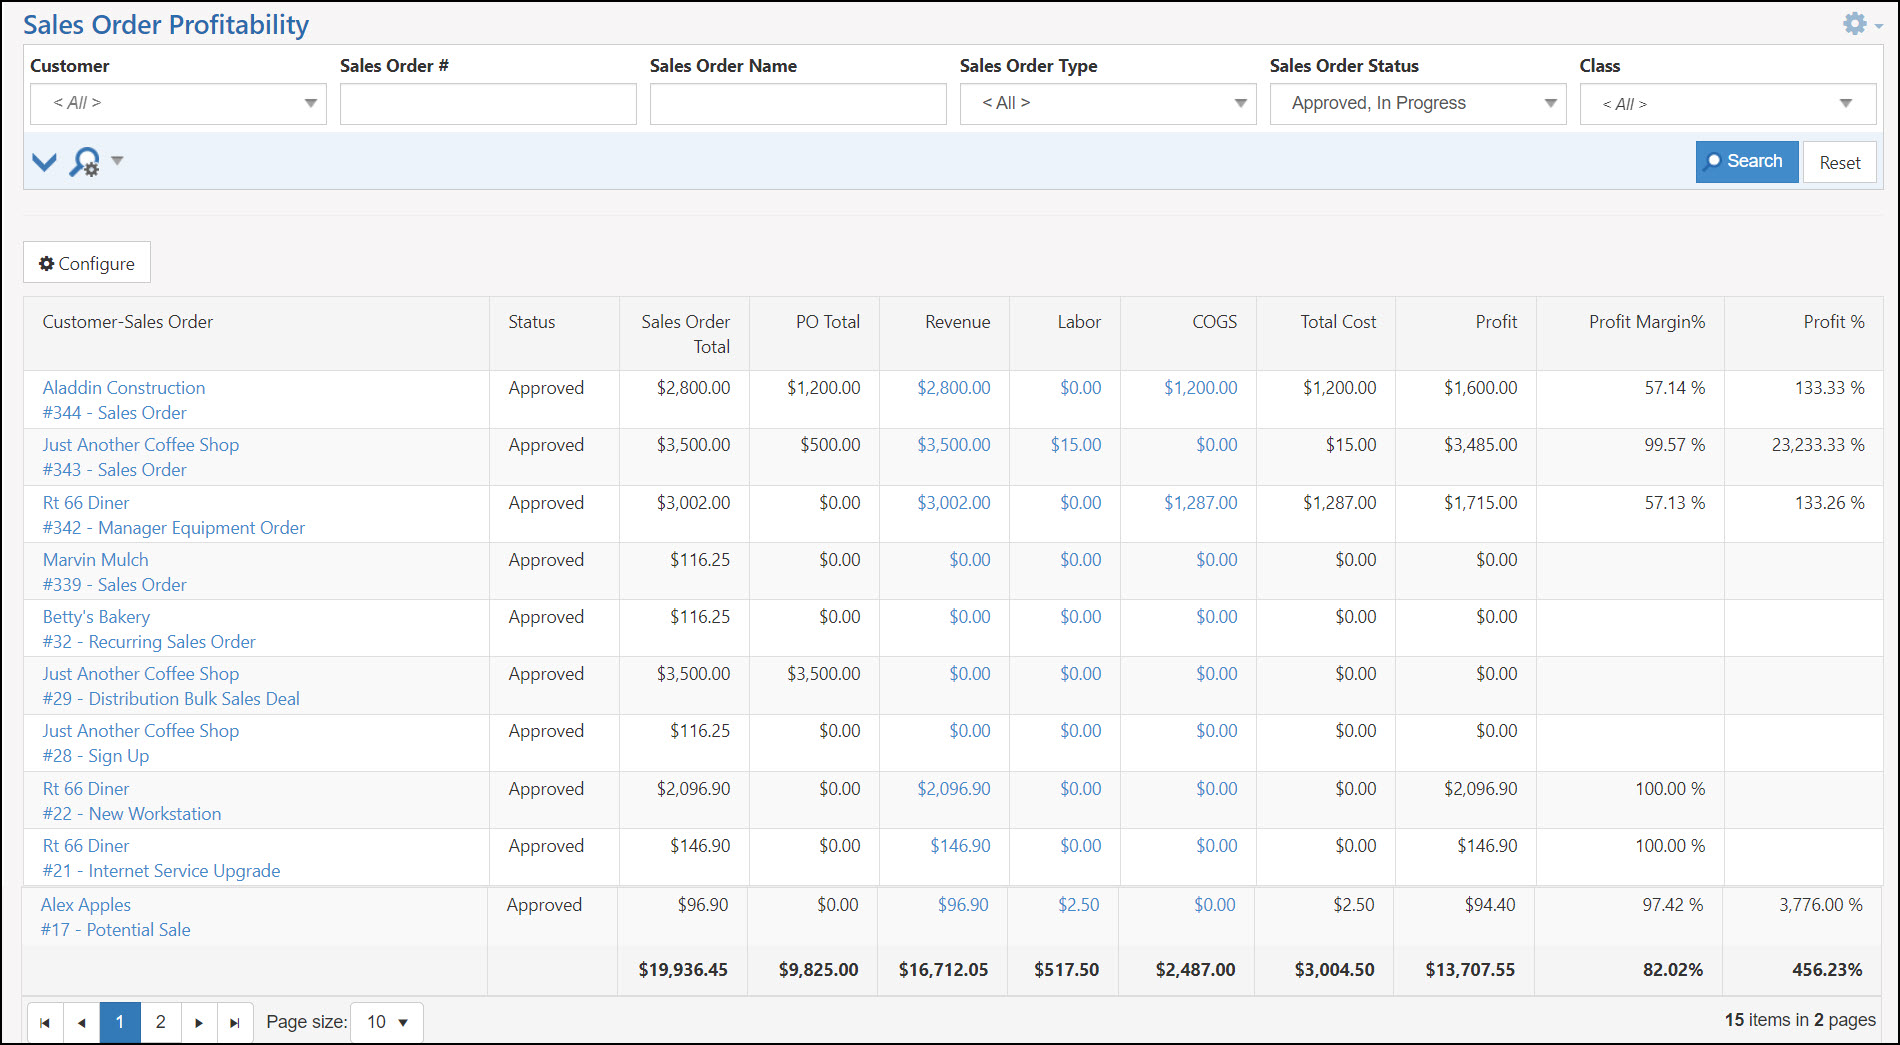 Image of the Sales Order Profitability report within Striven